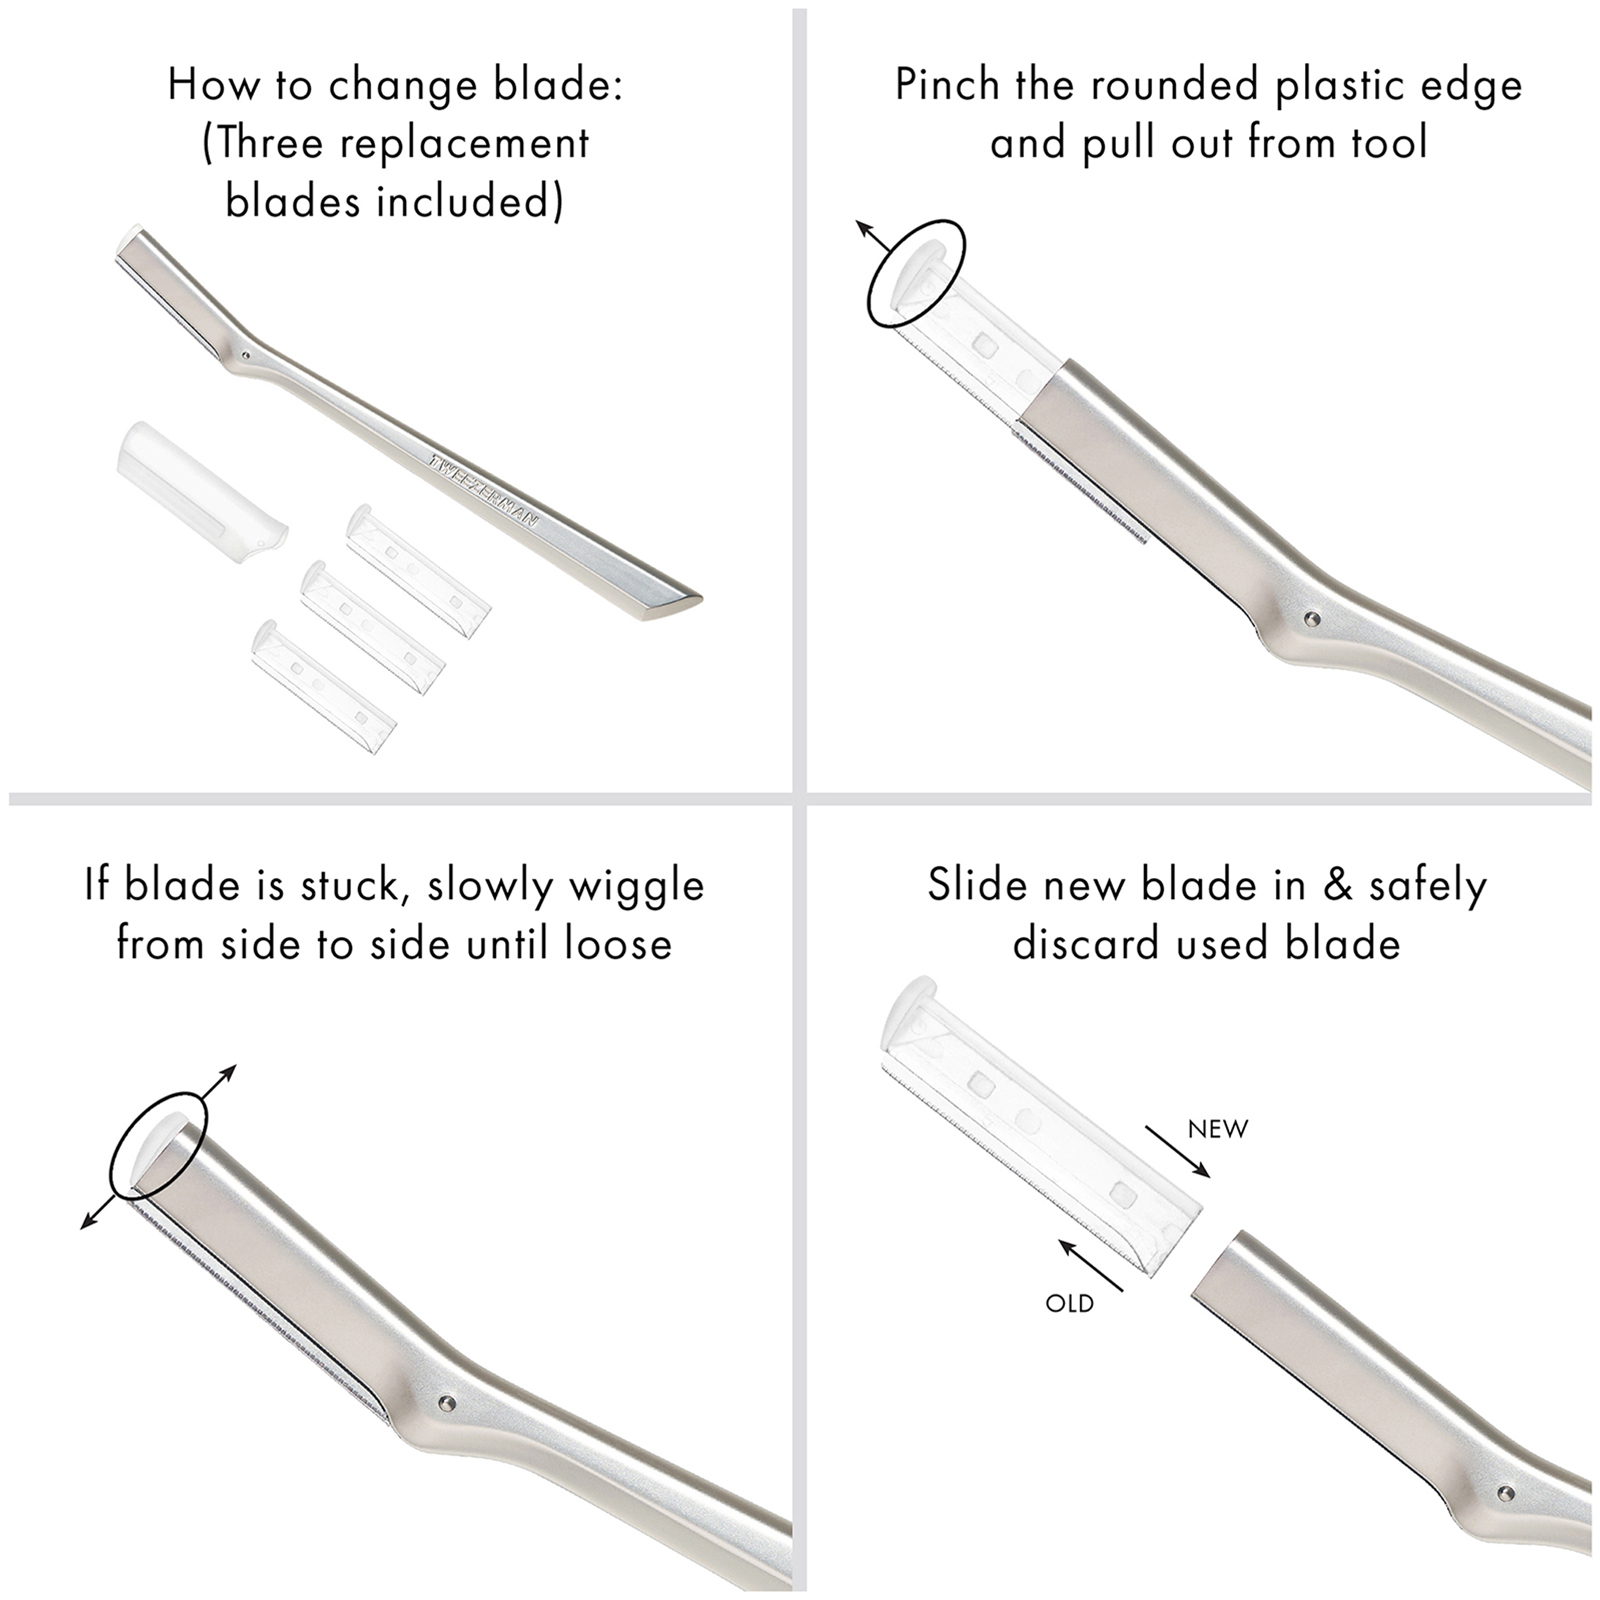 How to change blade (three replacement blades included)/ Step 1: Pinch the rounded plastic edge and pull out from tool. Step 2: If blade is stick, slowly wiggle from side to side until loose. Step 3: Slide new blade in and safely discard used blade